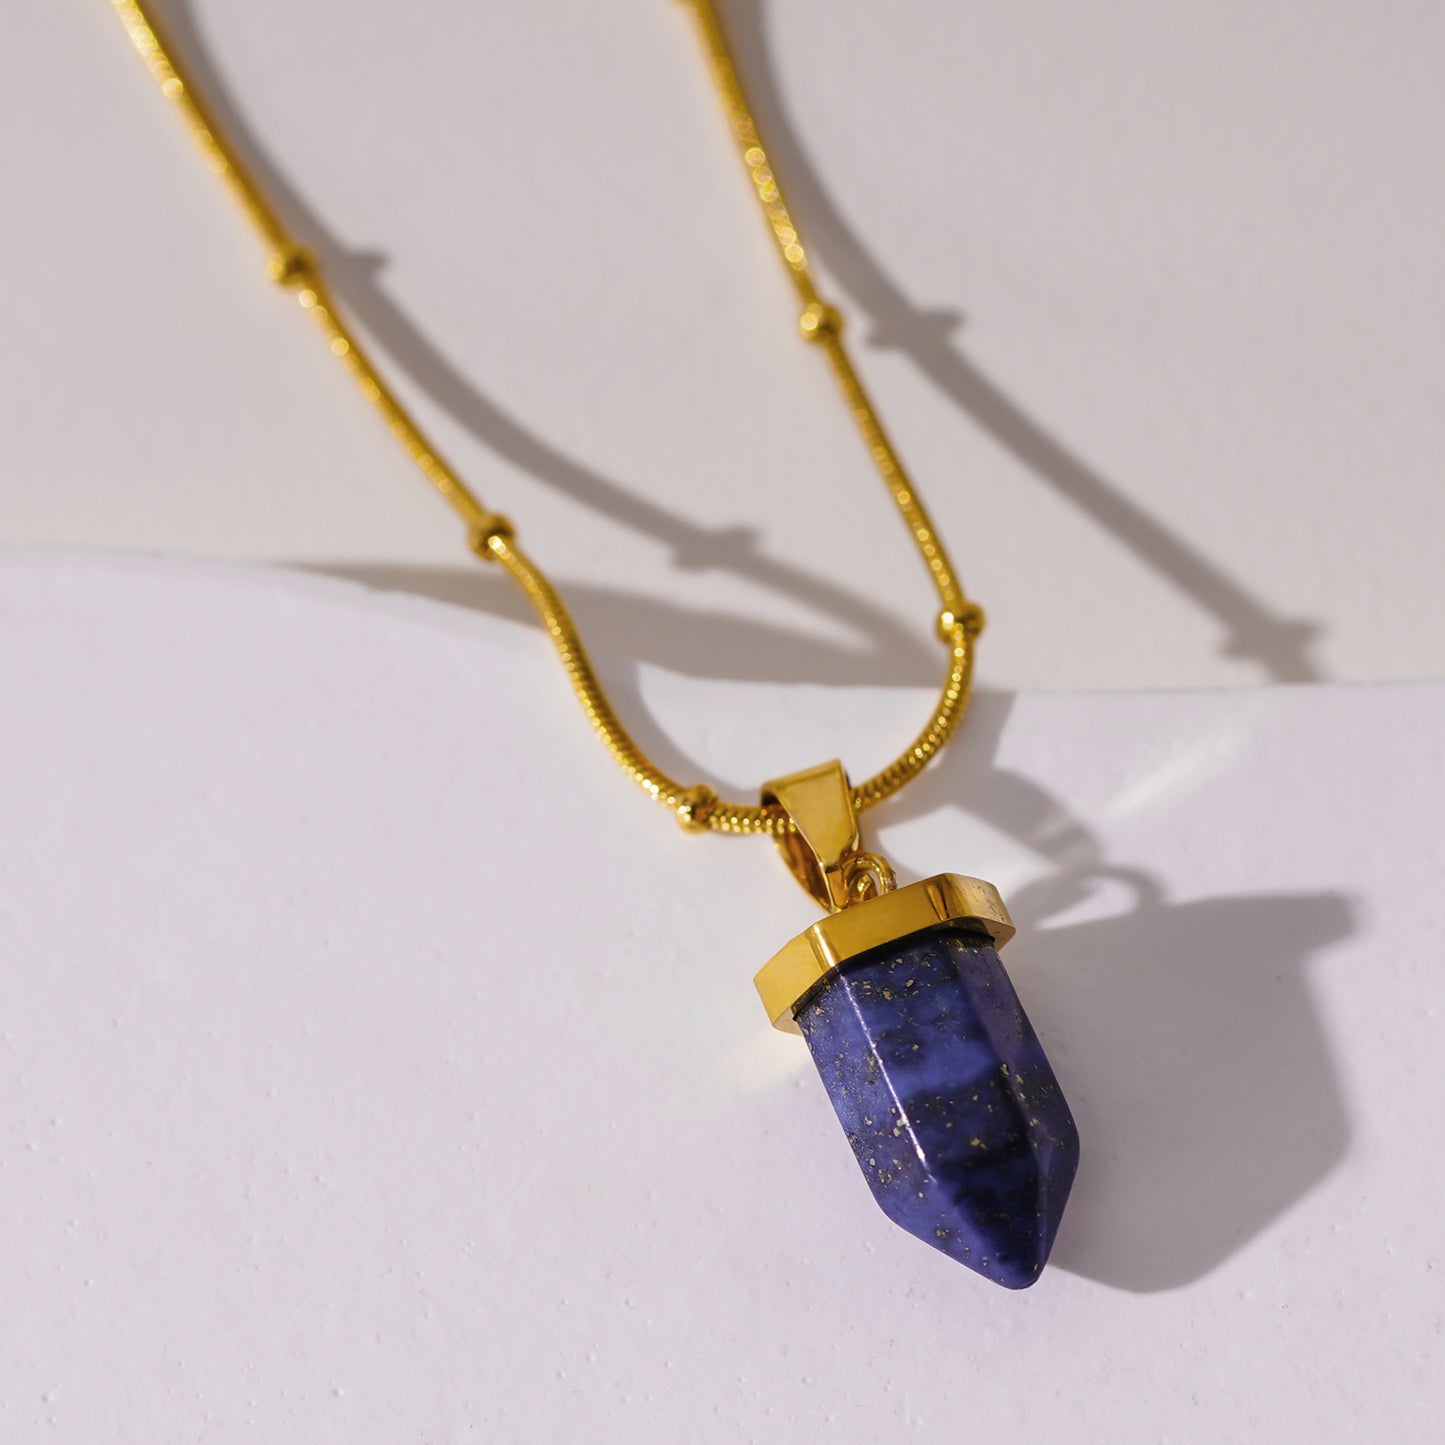 VIOLA: Lapis Lazuli Stone Pendant Anchored on a Beaded Snake Skin Textured Chain Necklace